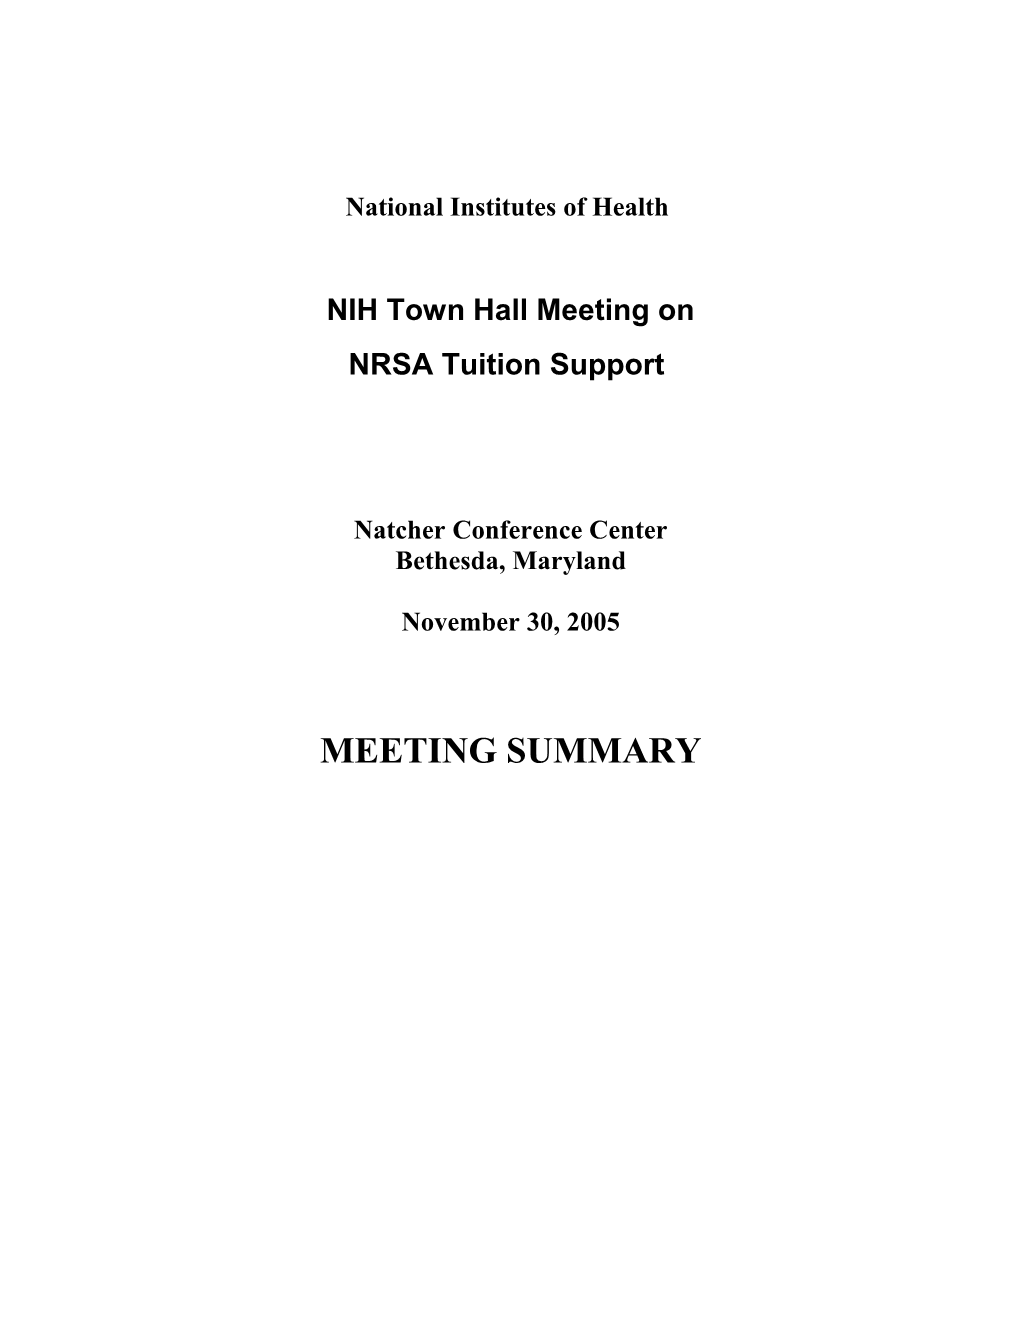 Summary of NIH Town Hall Meeting on NRSA Tuition Support - November 30, 2005